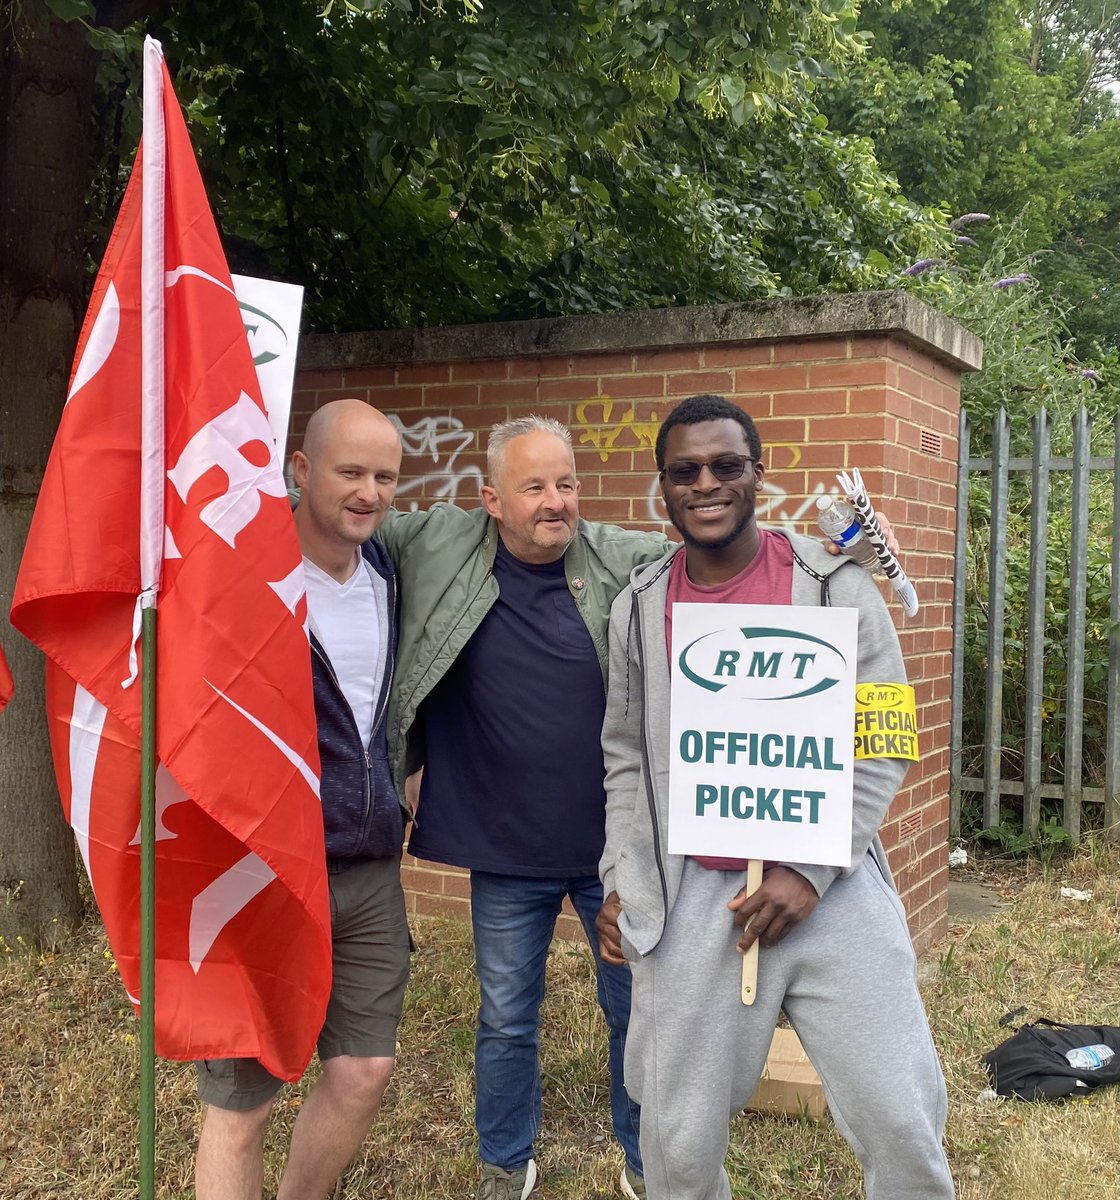 Another great day for our class - met a great group of @RMTunion strikers at Romford ROC doing online coverage for @socialistworker Now on to round 3 on Saturday, the #RailStrikes are a fight for everyone battling the Tories and cost of living crisis. #VictoryToTheRMT #RMTstrikes